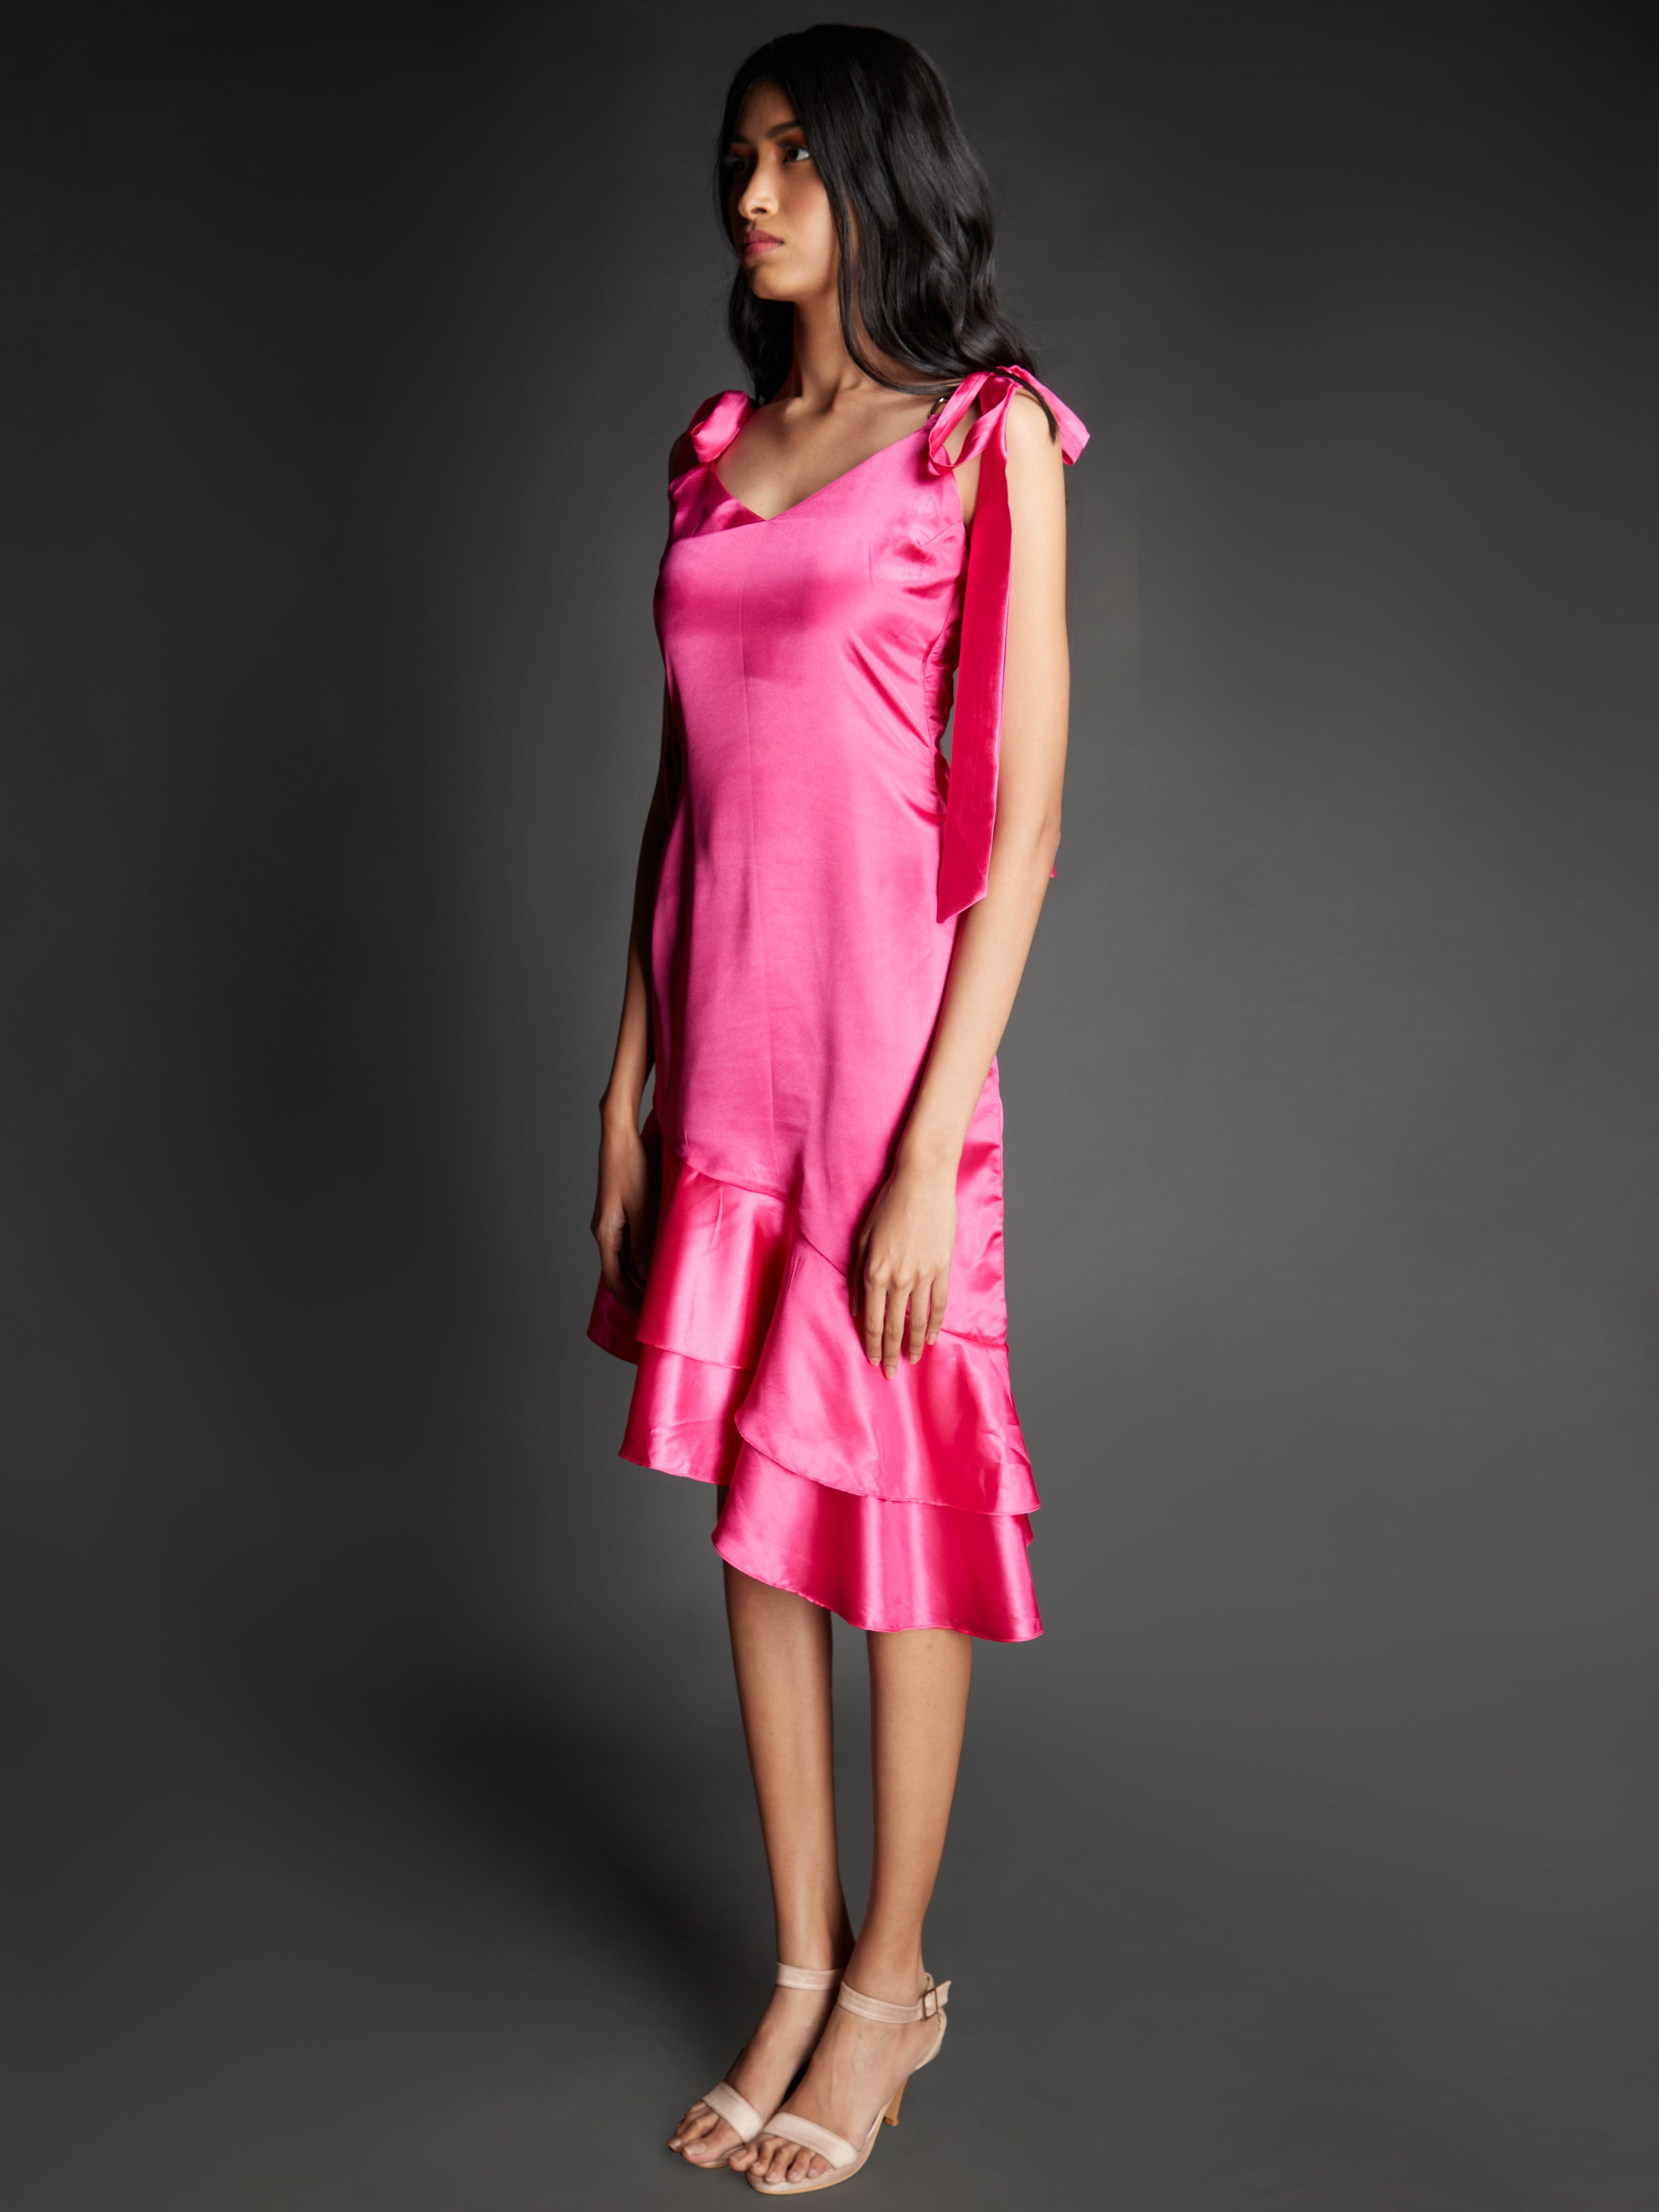 Ruffle Hot Pink Dress With Shoulder Tie-Up